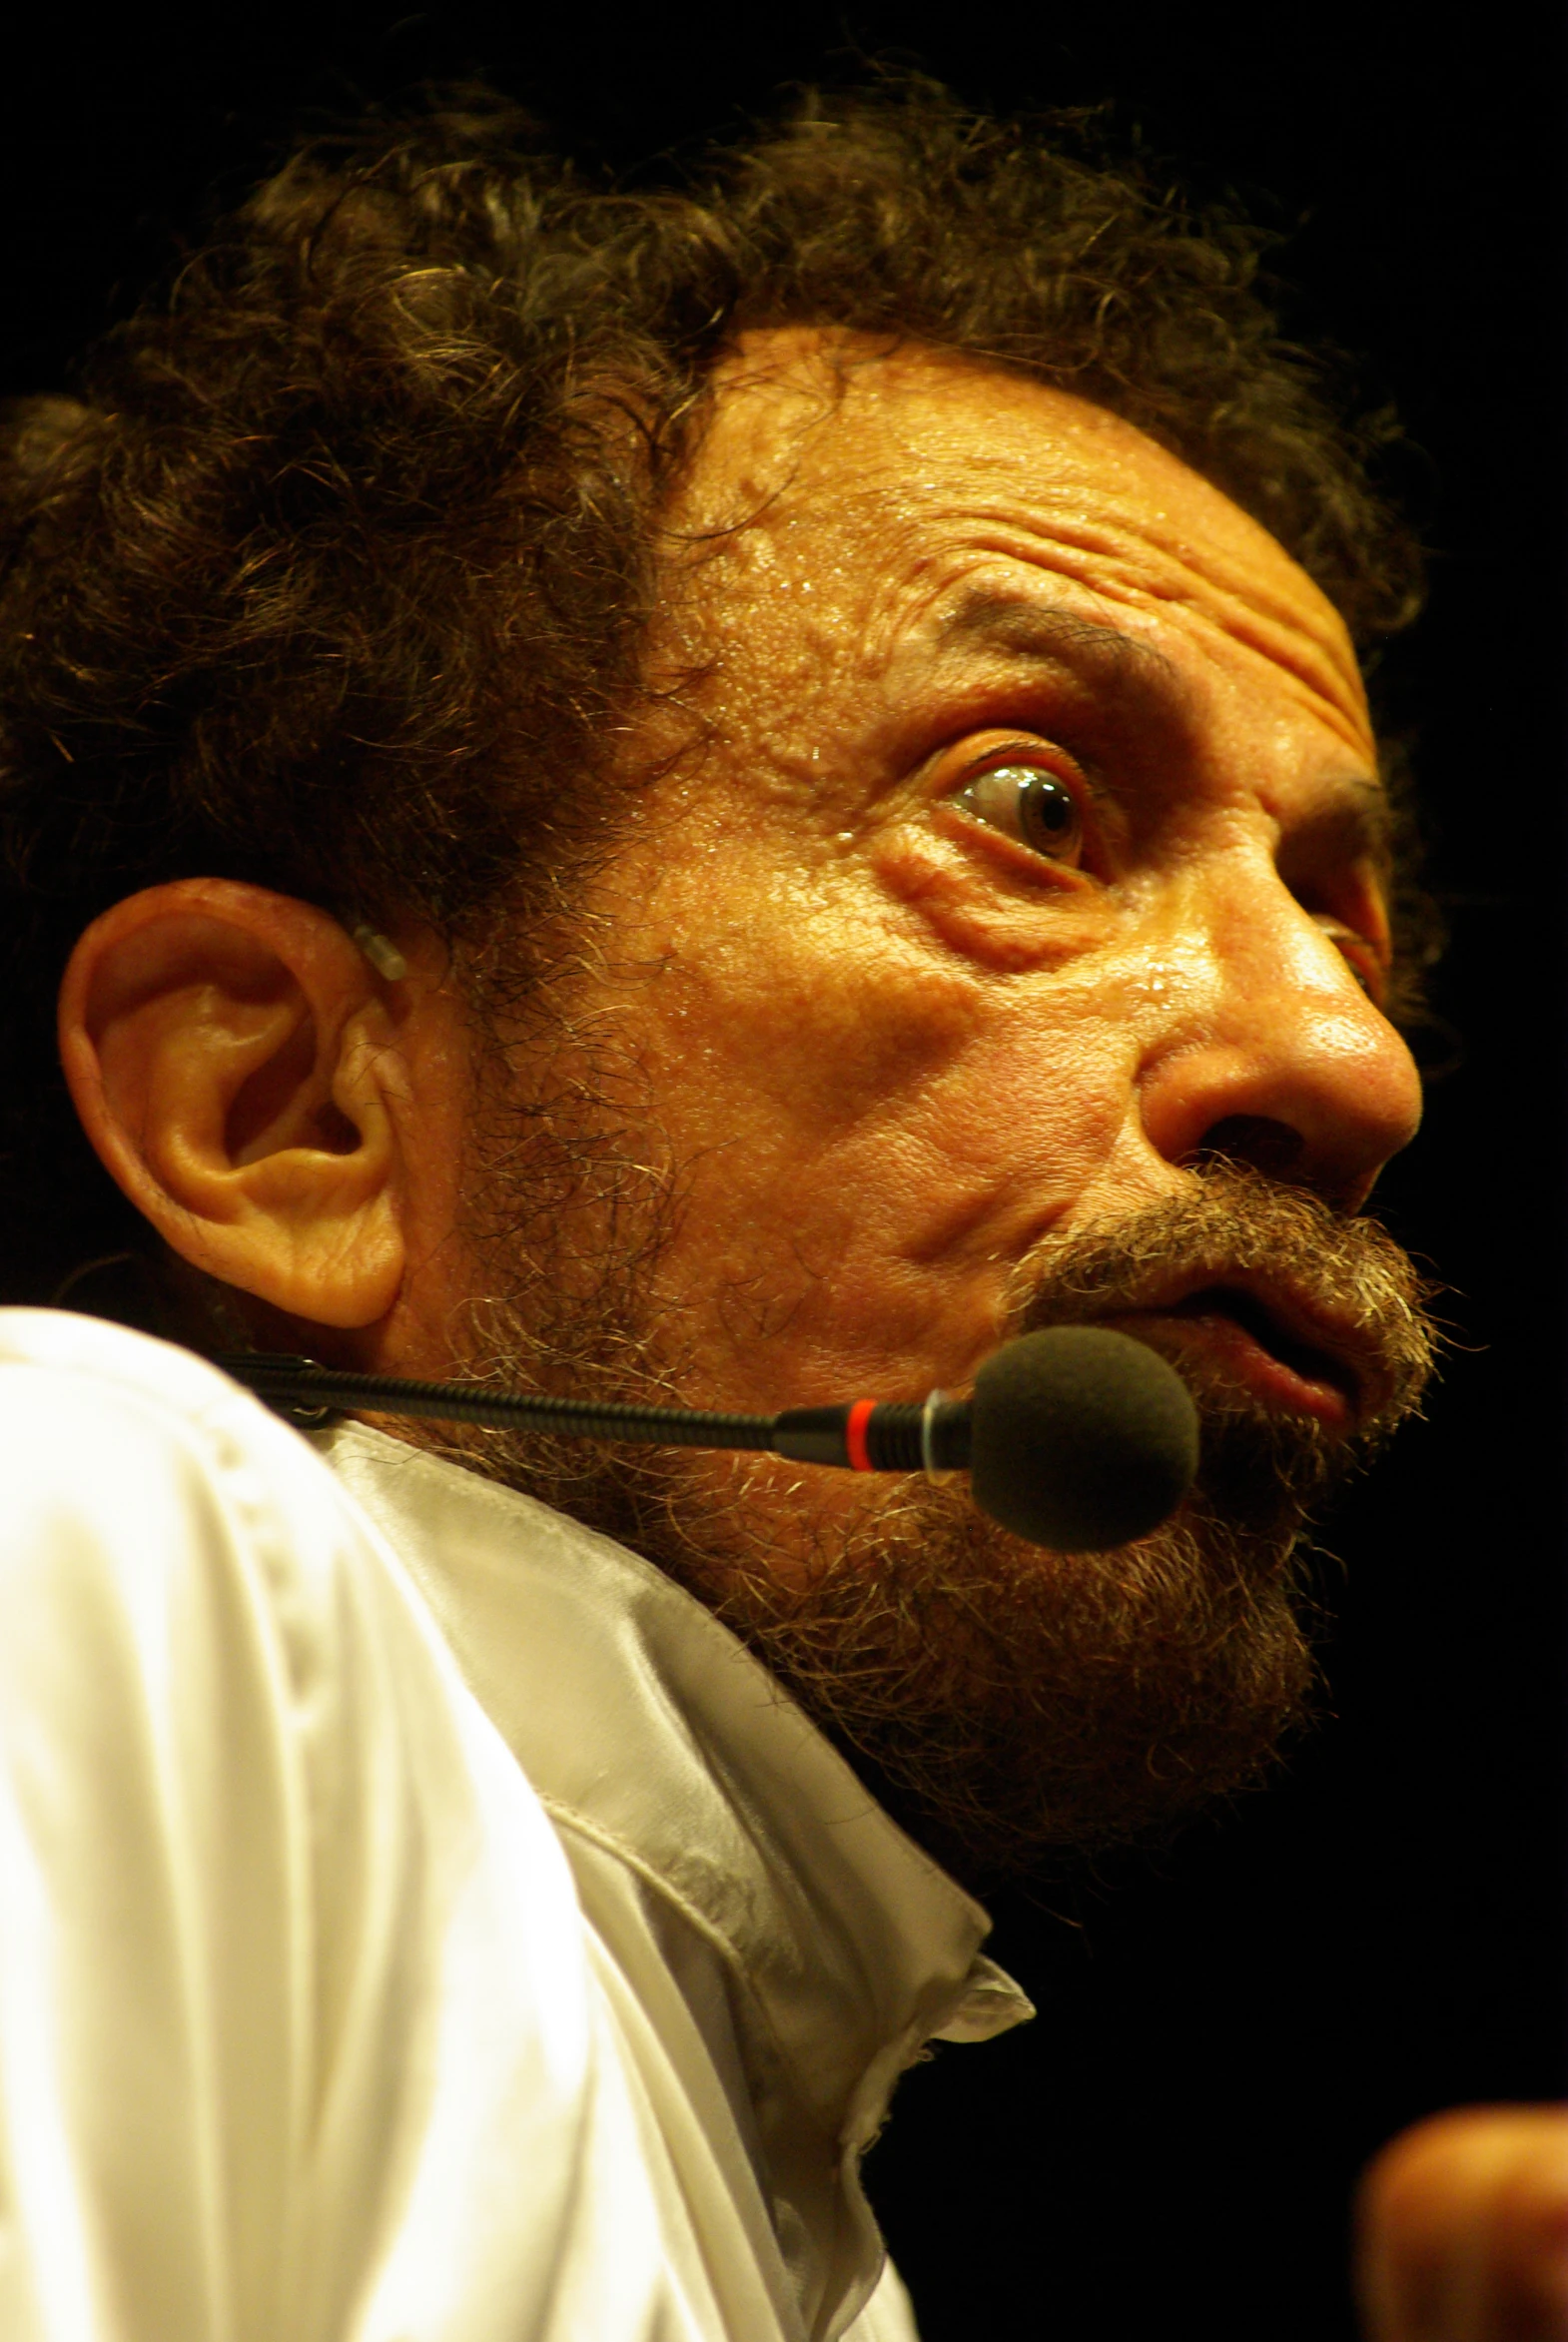 a man with dark hair and beard speaking into a microphone